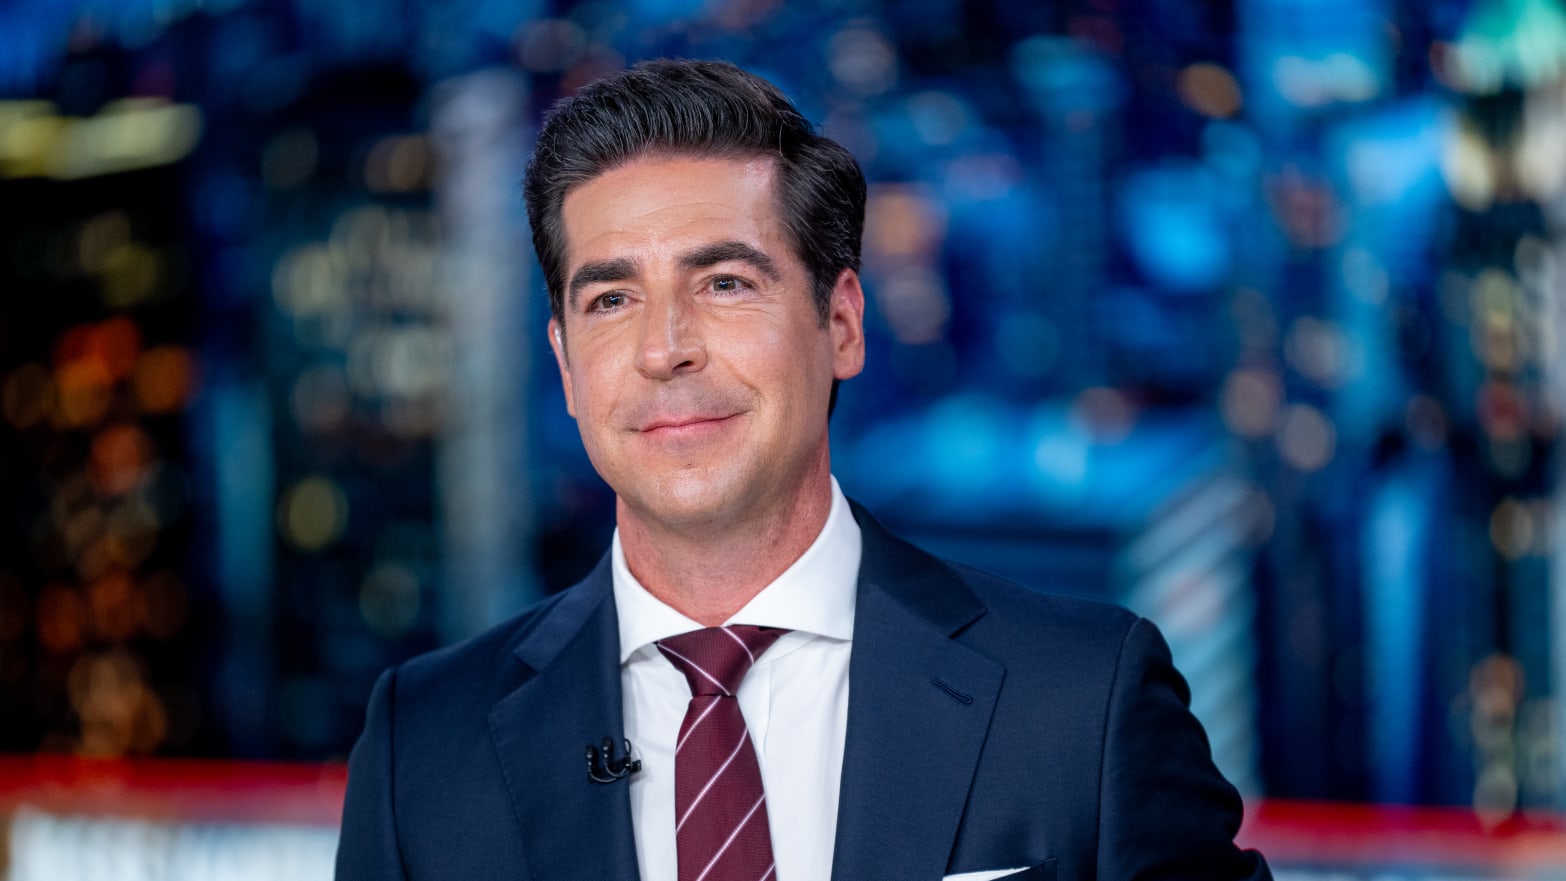 Jesse Watters on the set of his primetime Fox News show.